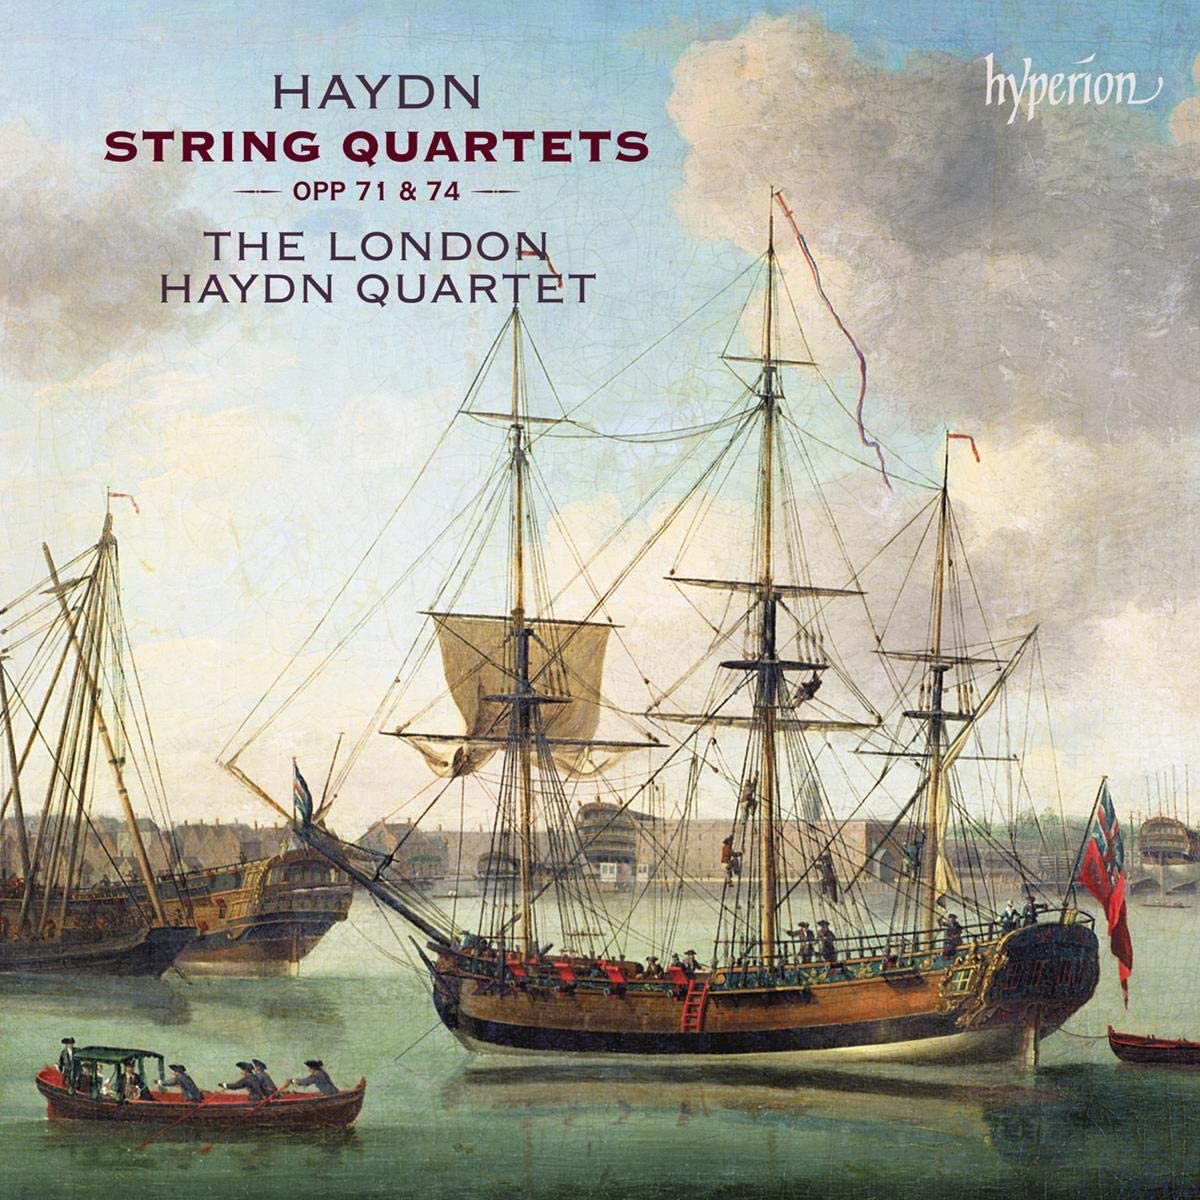 London Haydn Quartet play opp 71 and 74 complete